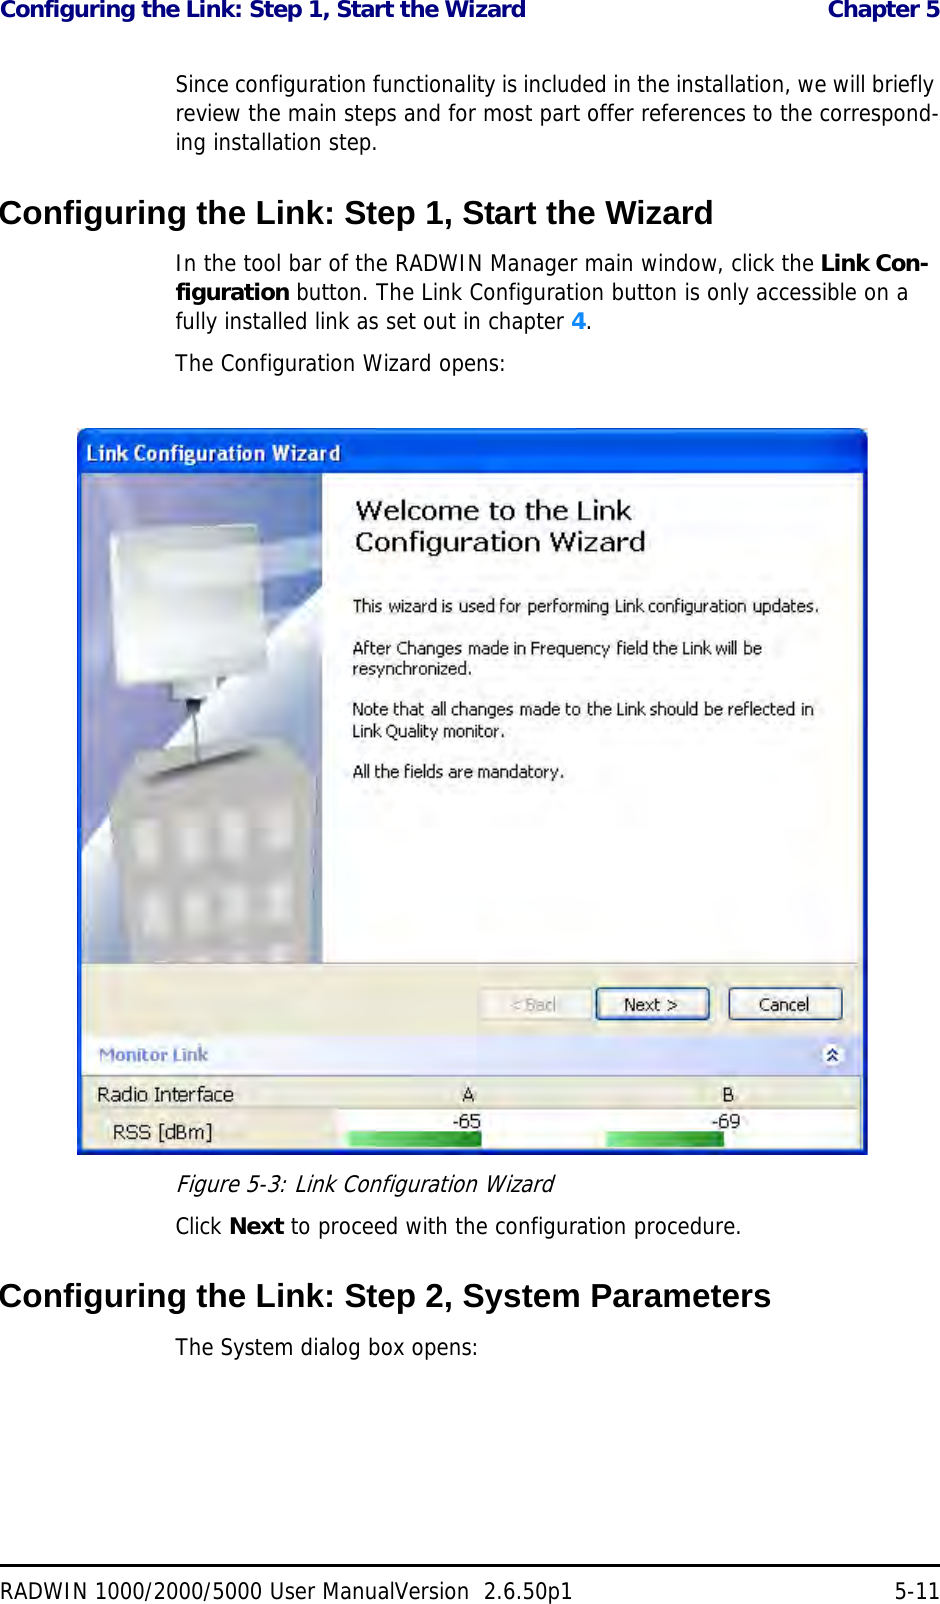 Configuring the Link: Step 1, Start the Wizard  Chapter 5RADWIN 1000/2000/5000 User ManualVersion  2.6.50p1 5-11Since configuration functionality is included in the installation, we will briefly review the main steps and for most part offer references to the correspond-ing installation step.Configuring the Link: Step 1, Start the WizardIn the tool bar of the RADWIN Manager main window, click the Link Con-figuration button. The Link Configuration button is only accessible on a fully installed link as set out in chapter 4.The Configuration Wizard opens:Figure 5-3: Link Configuration WizardClick Next to proceed with the configuration procedure.Configuring the Link: Step 2, System ParametersThe System dialog box opens: